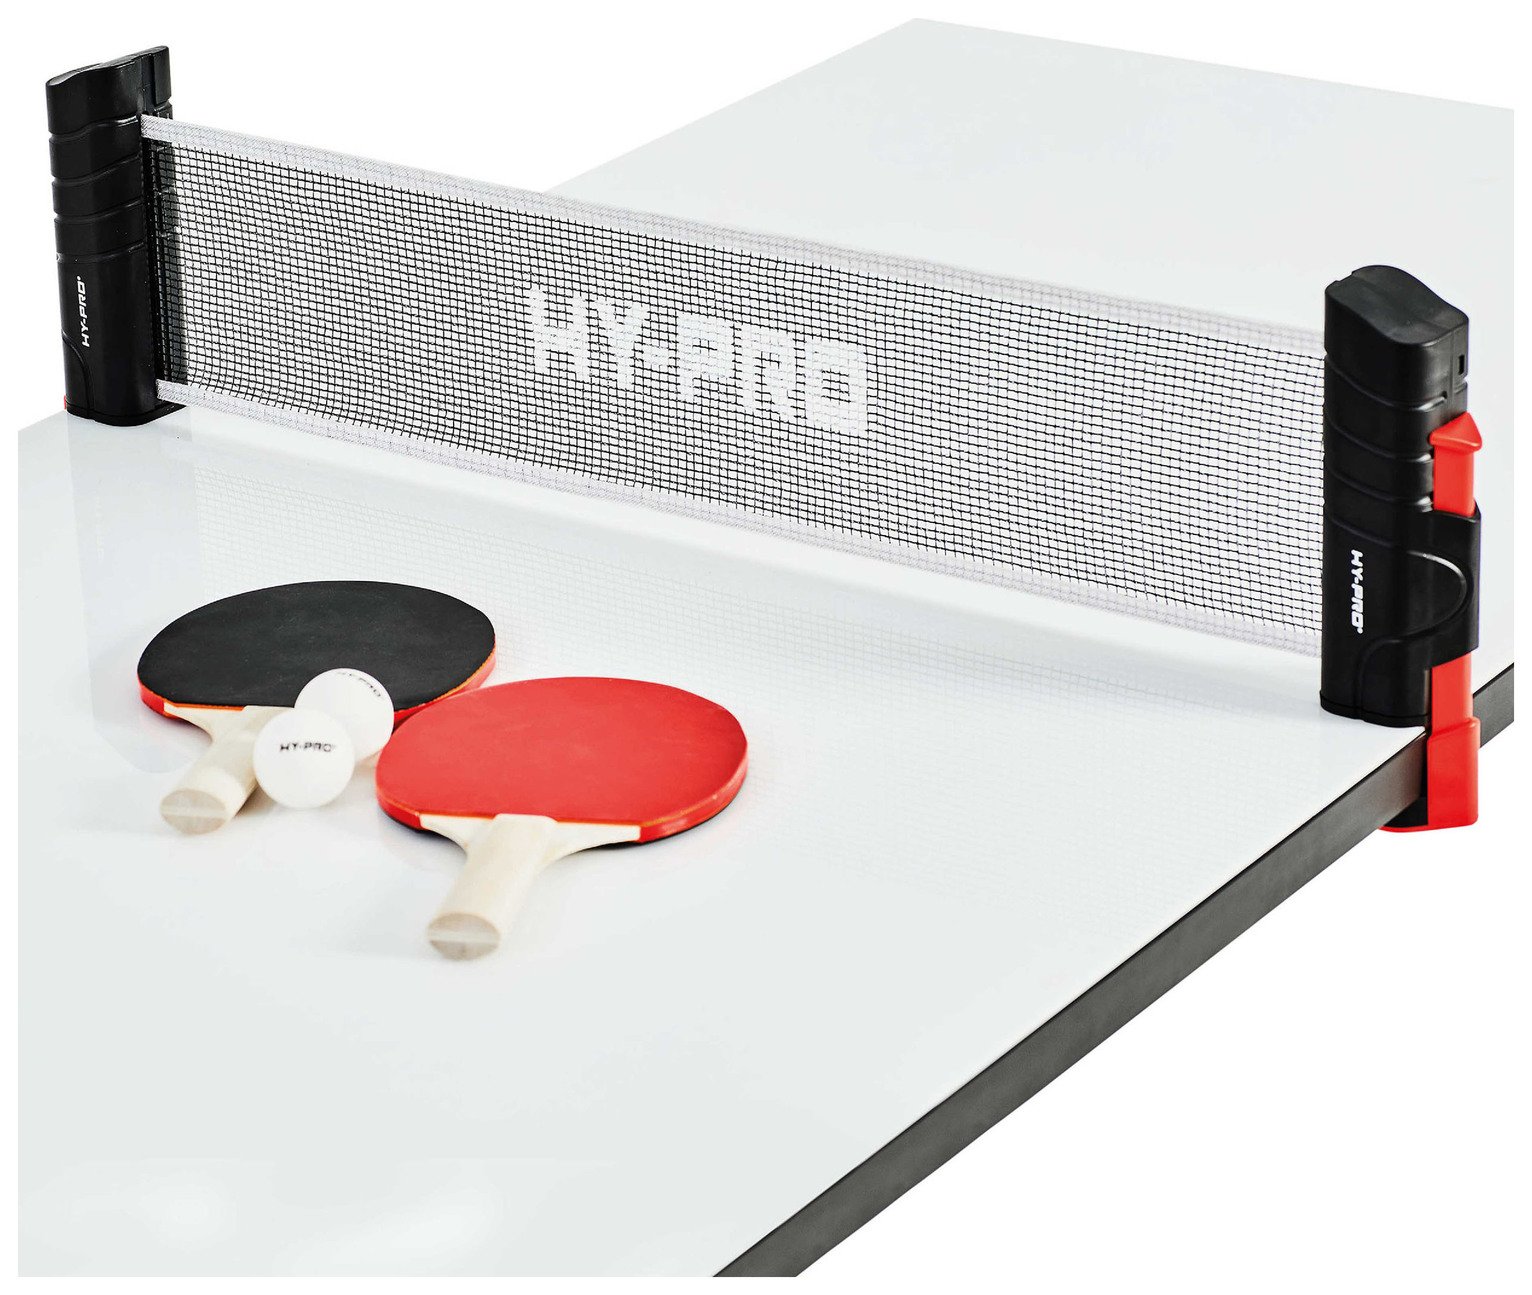 Hy-Pro Two Player Table Tennis Set Review